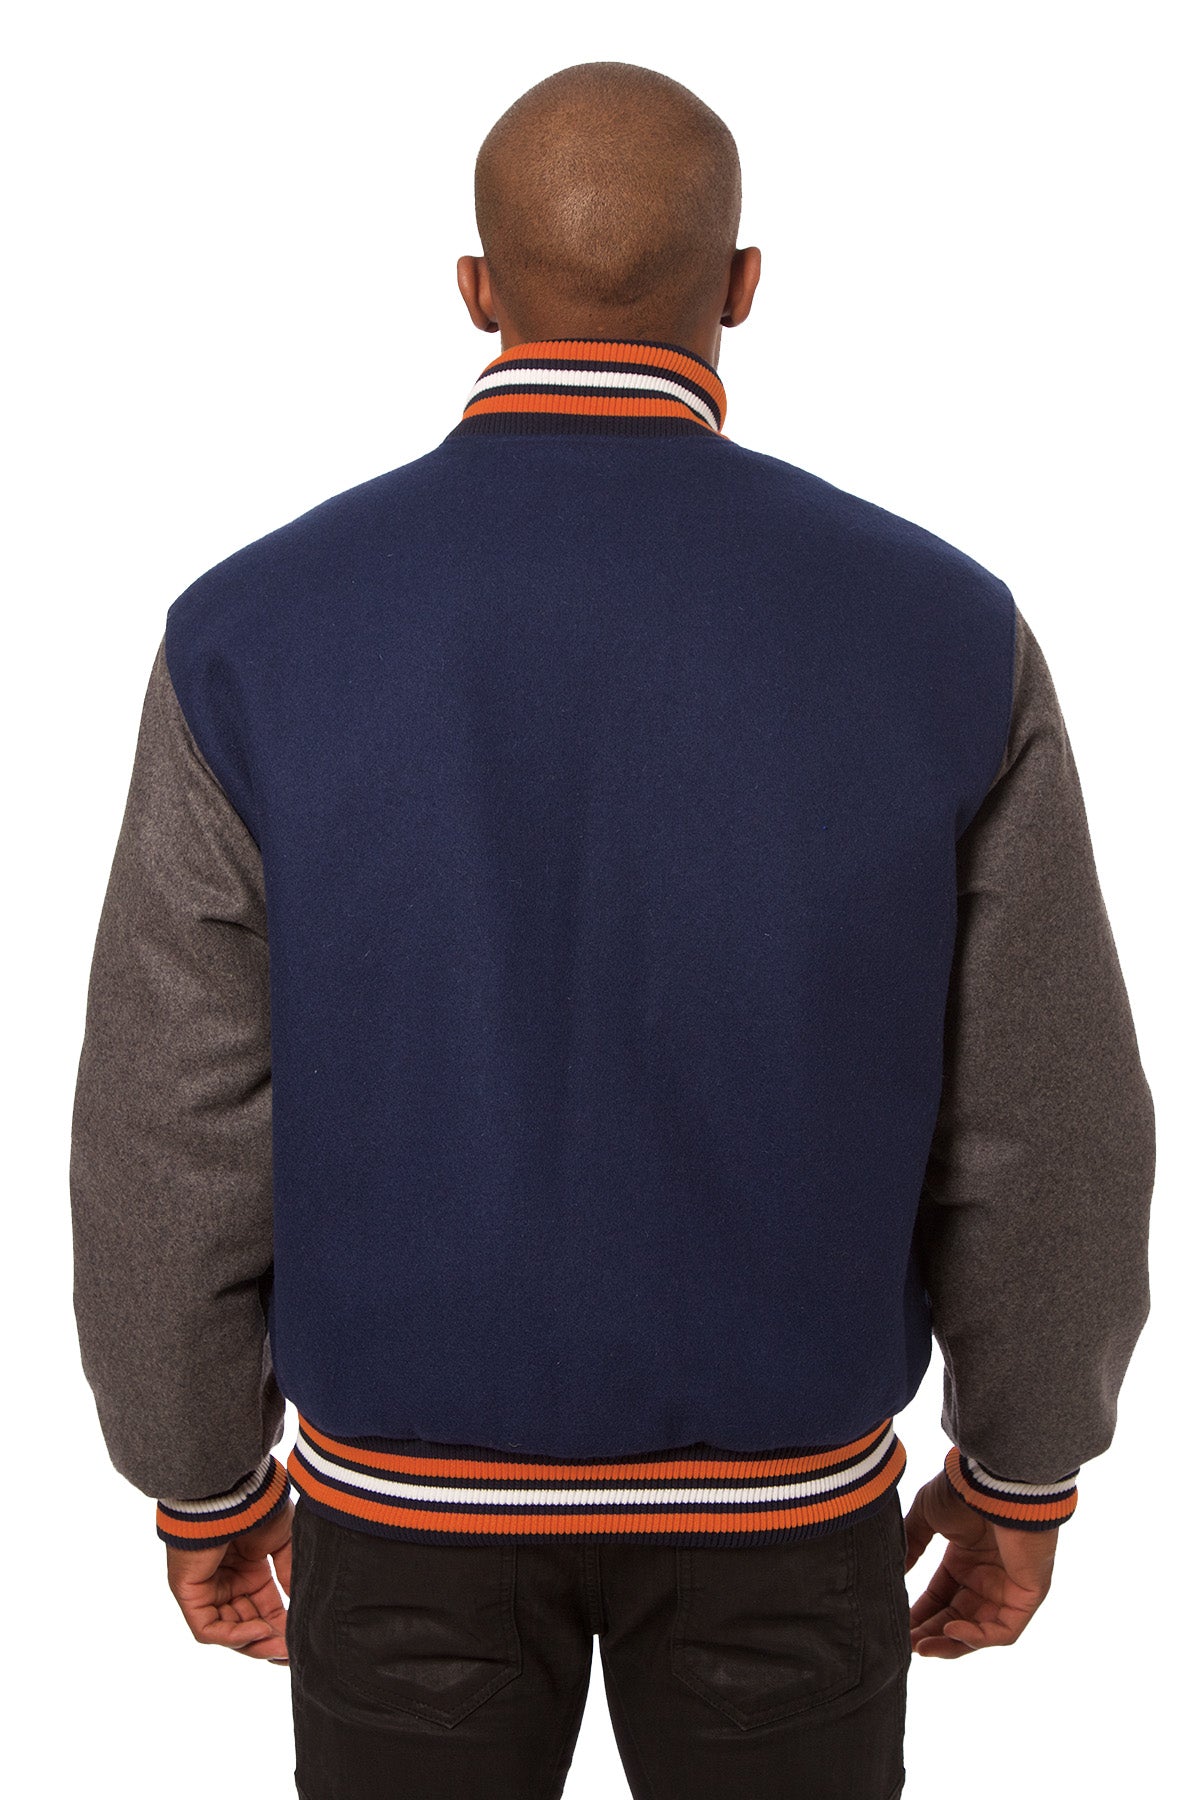 All-Wool Varsity Jacket in Navy and Gray